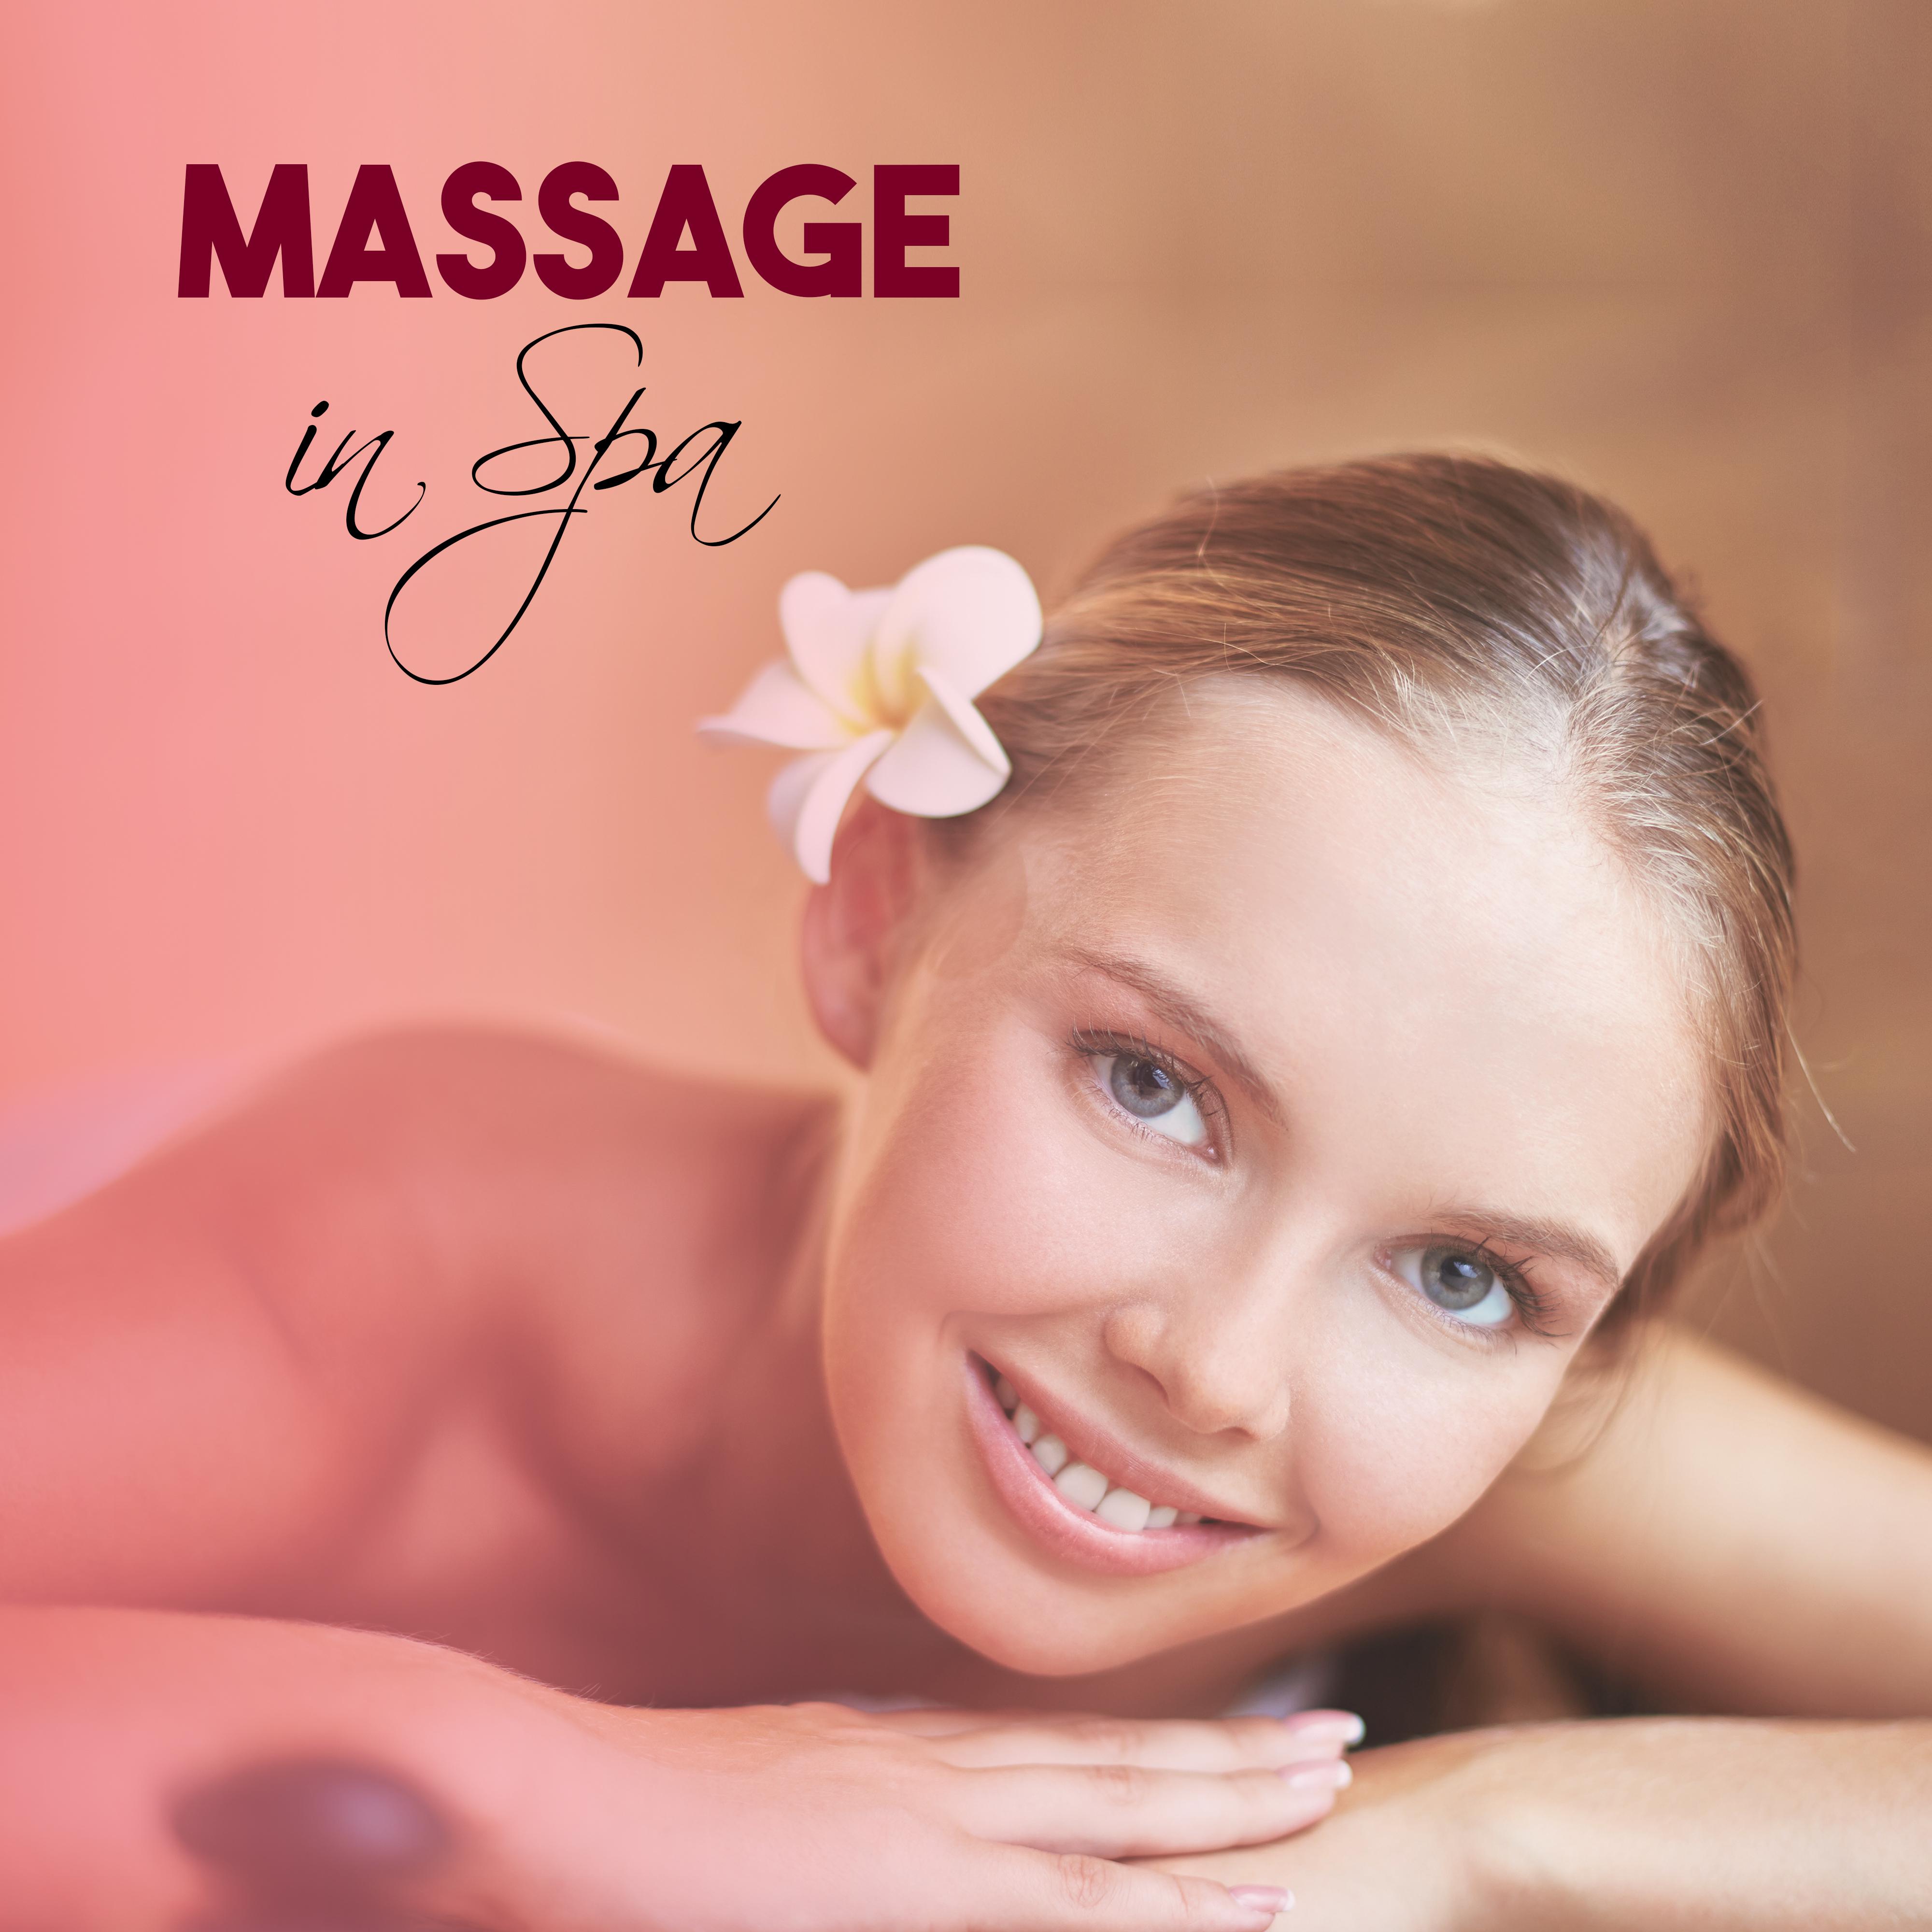 Massage in Spa  Relaxation Wellness, Deep Relief, Calming Sounds, Relax, Spa Music, Relaxing Therapy for Body, Stress Relief